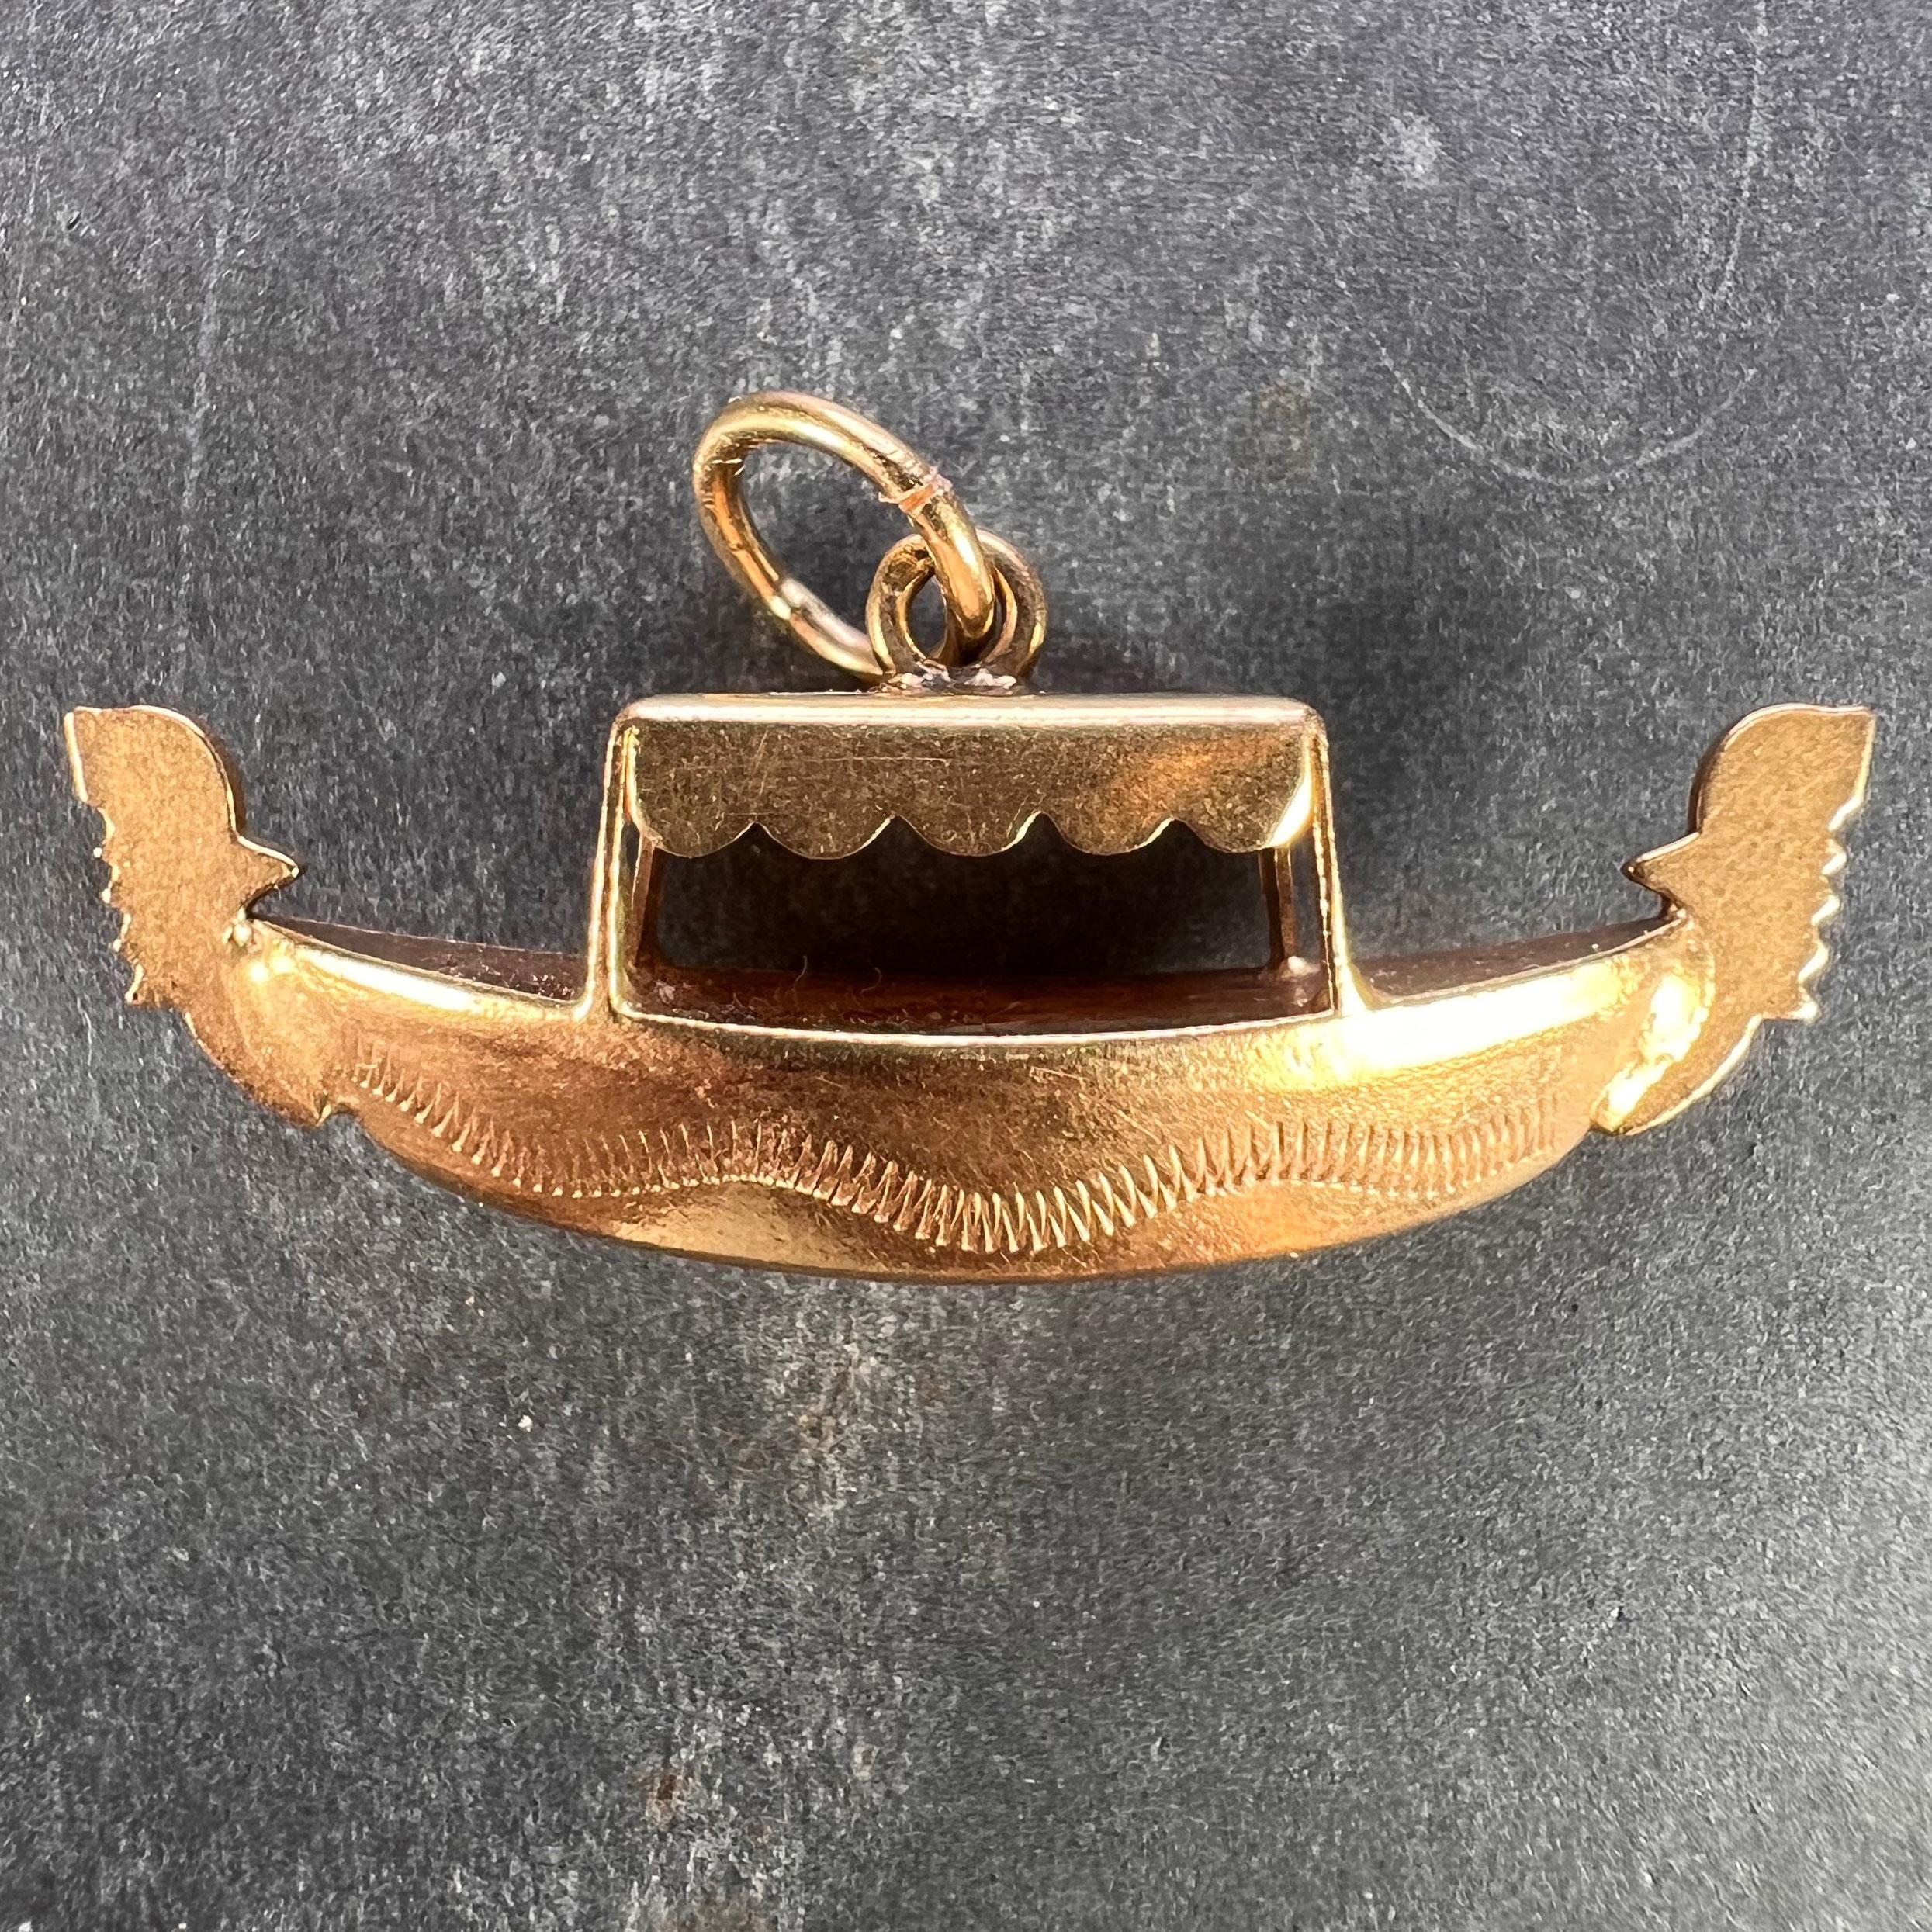 An Italian 18 karat (18K) yellow gold charm pendant designed as a gondola. Stamped with Italian marks for 18 karat gold to the jump ring along with French import marks for 18 karat gold.
 
Dimensions: 1.5 x 3.6 x 1 cm (not including jump